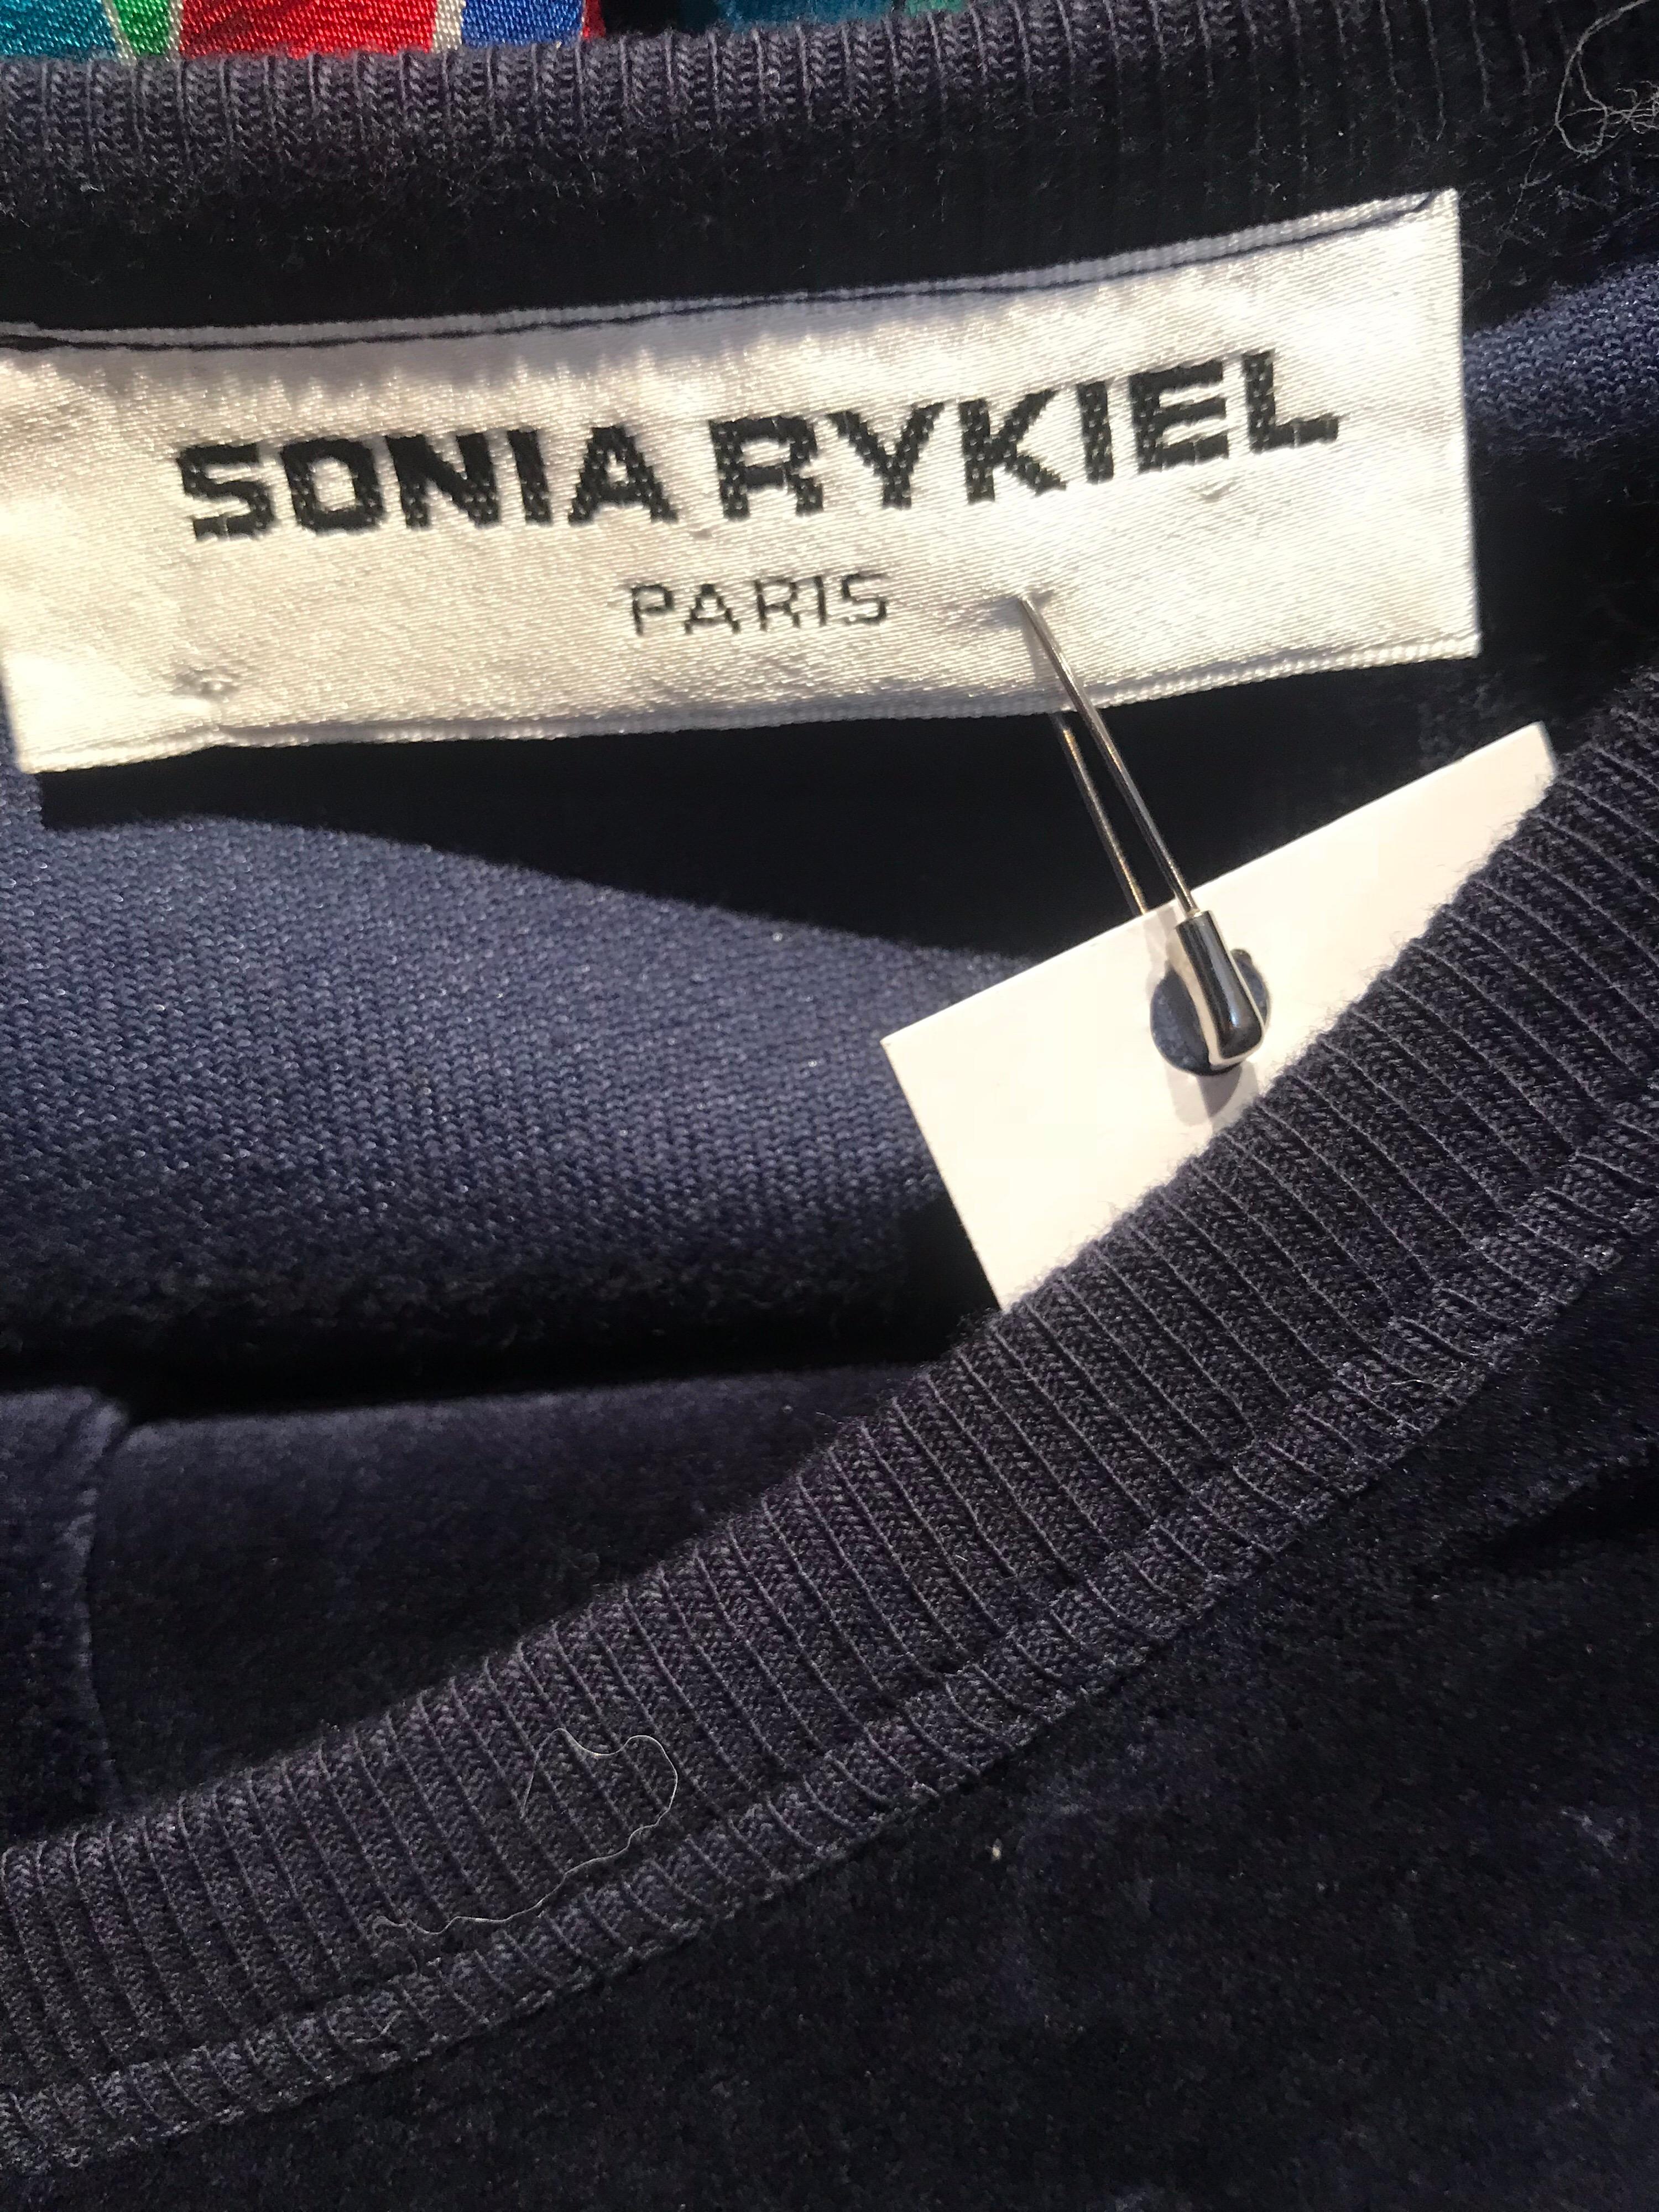 Vintage Sonia Rykiel Leisure Suit In Good Condition For Sale In London, GB